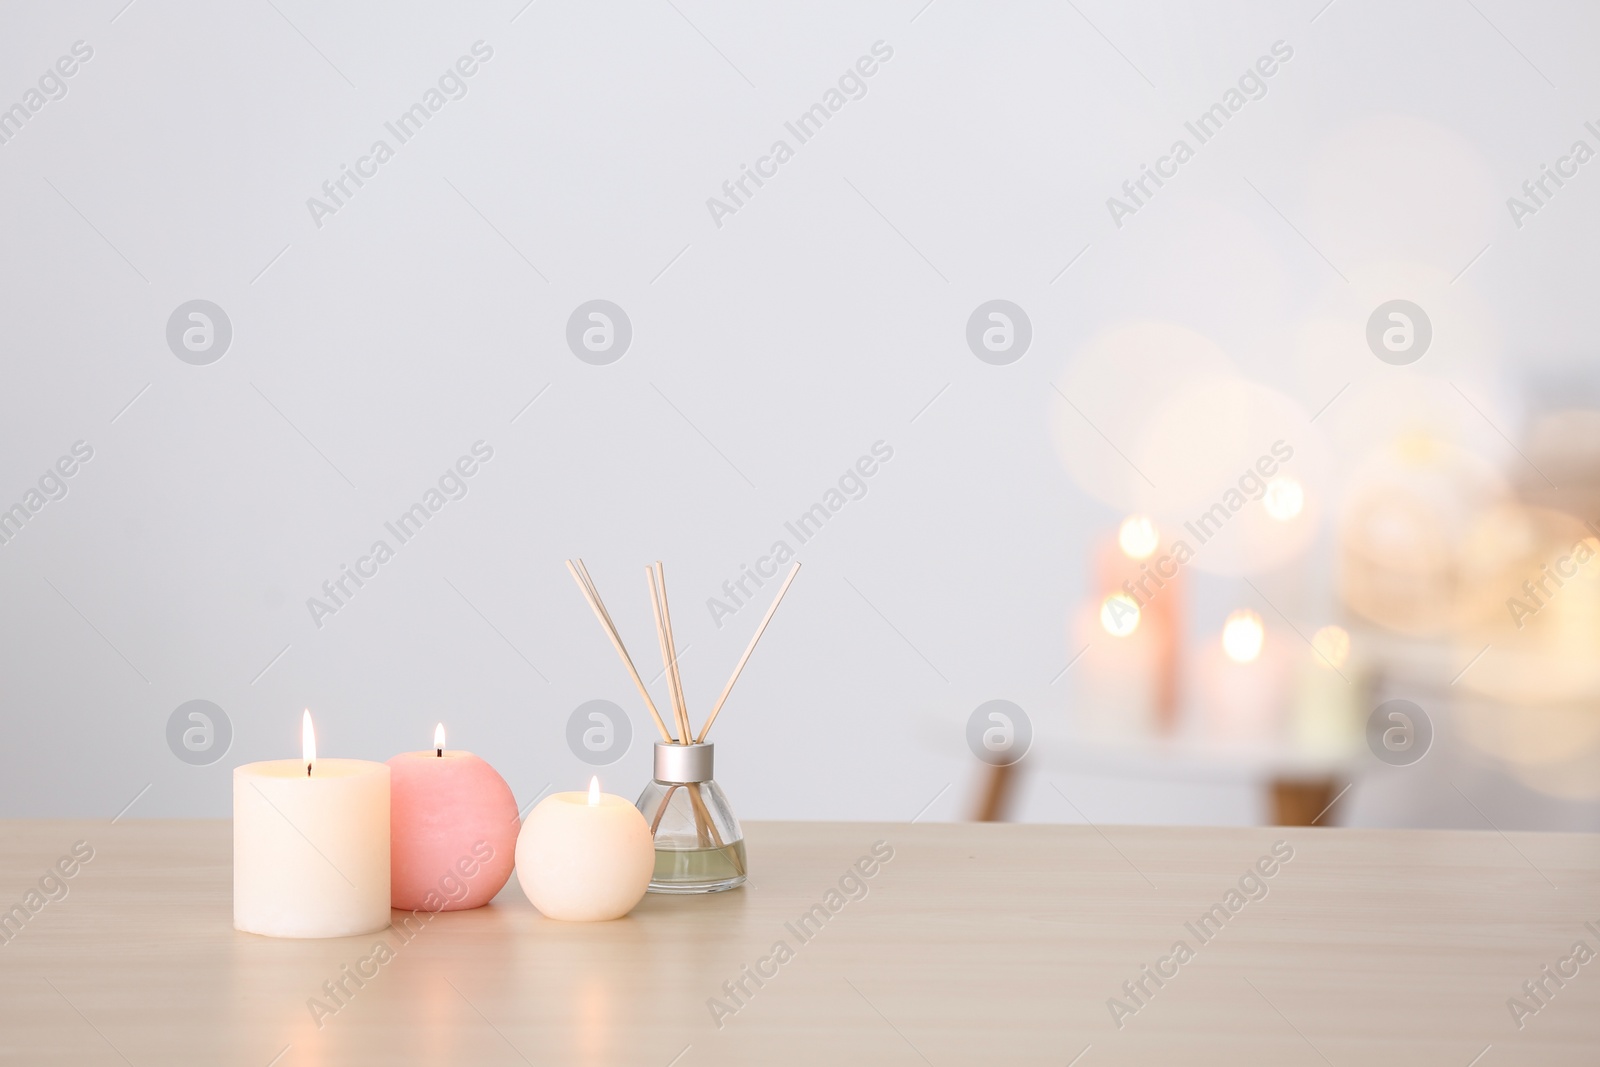 Photo of Candles and reed air freshener on table against blurred background, space for text. Spa concept